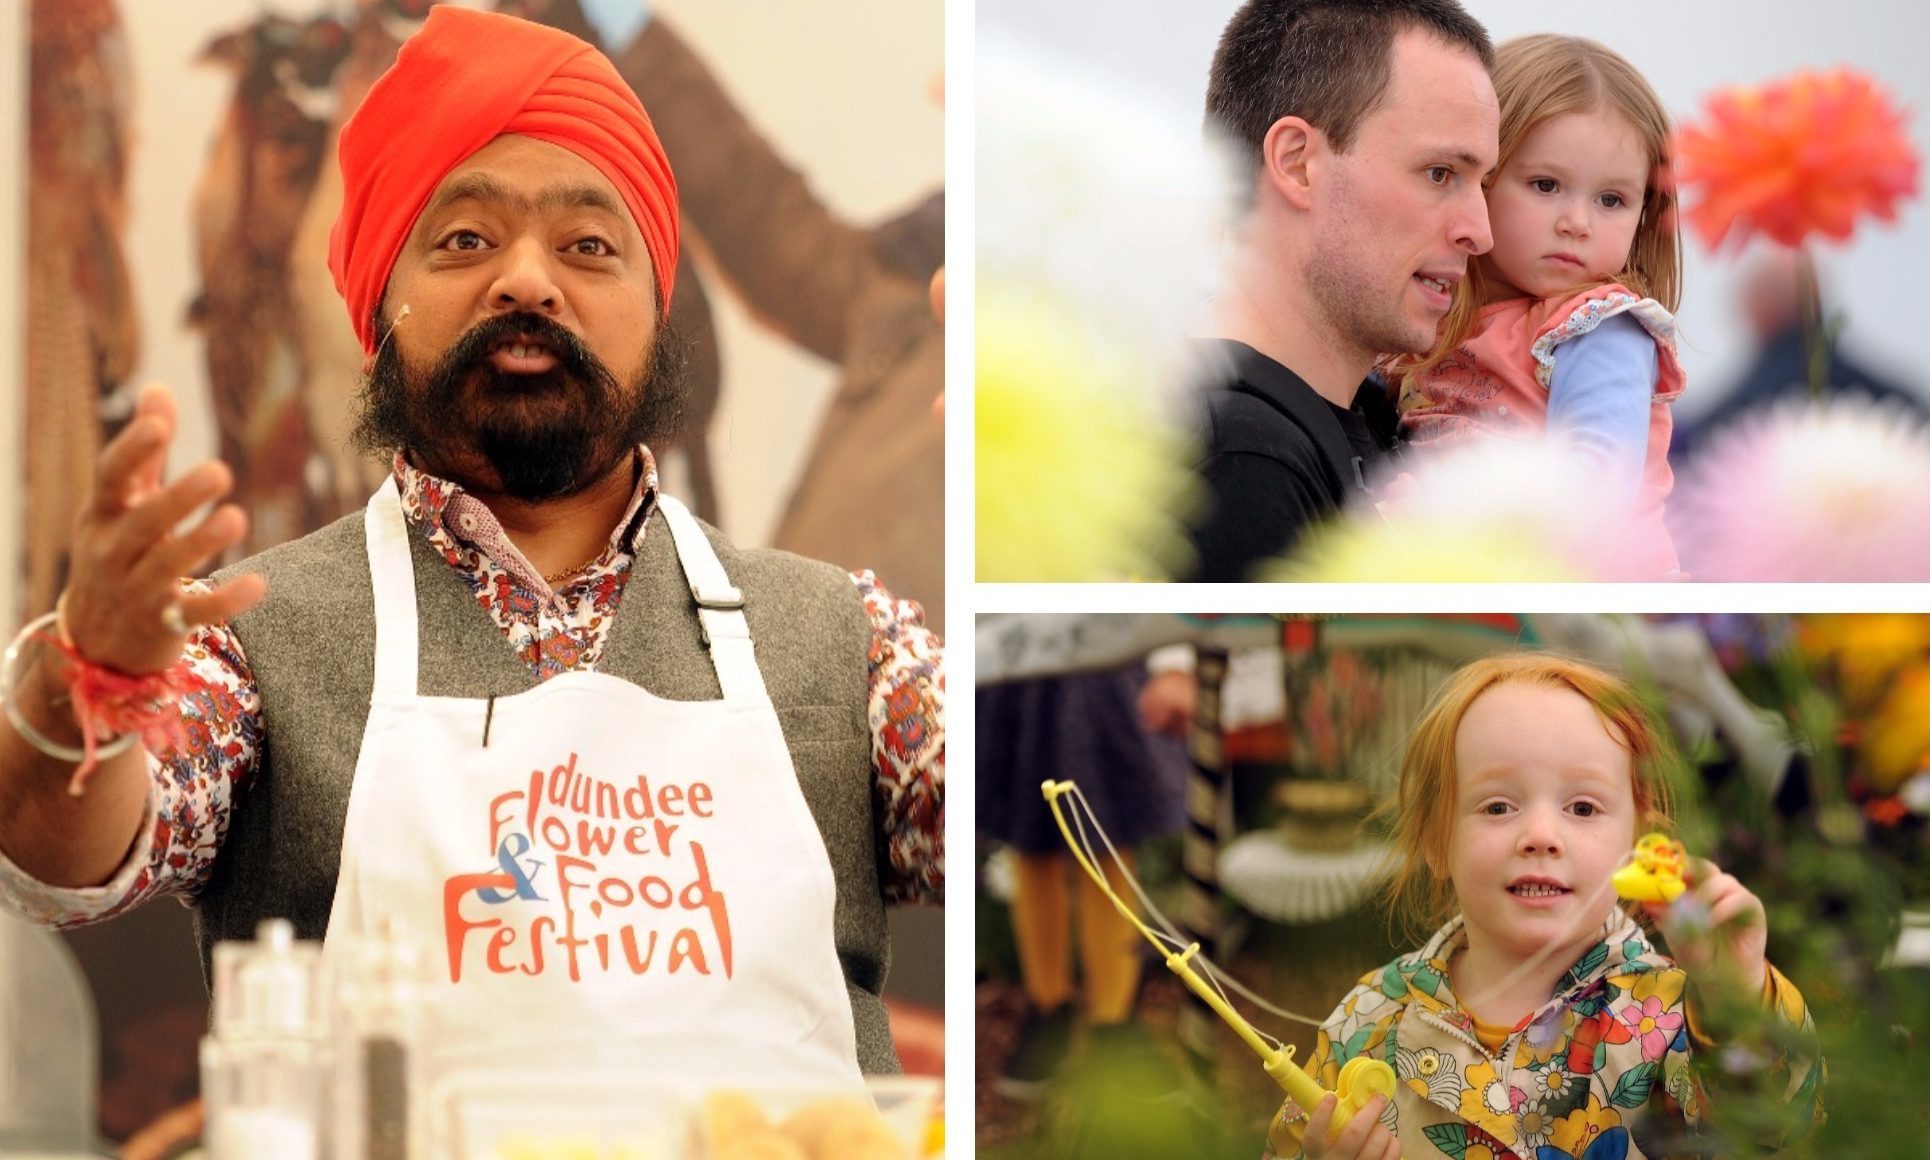 The 2017 Dundee Flower and Food Festival